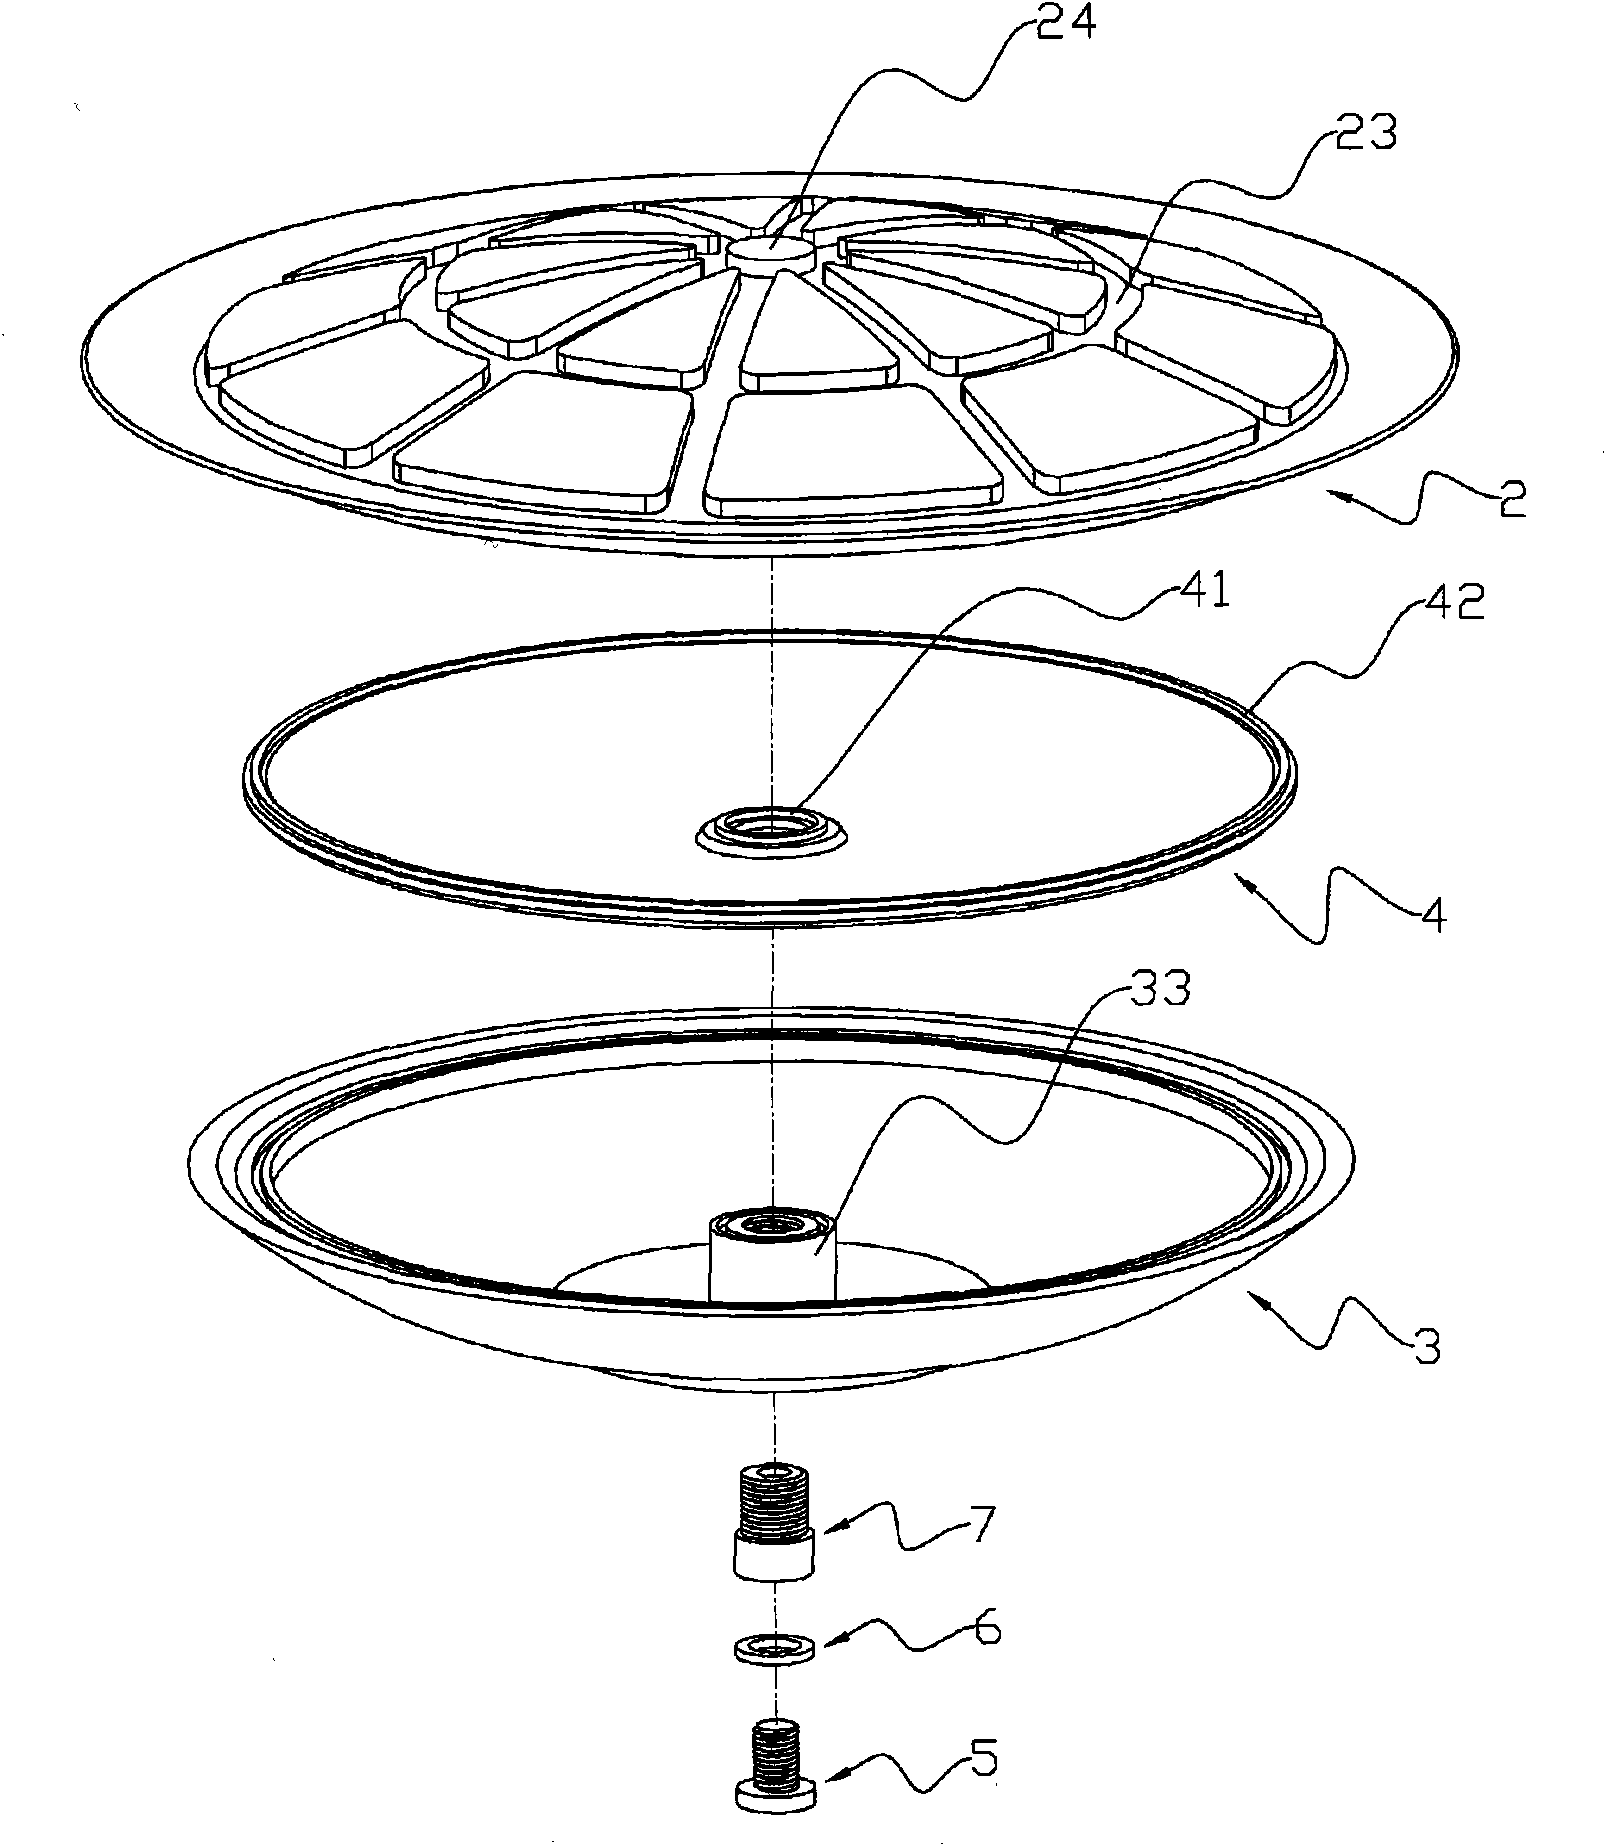 Cooling container for the preventive frozen burst or shape alteration